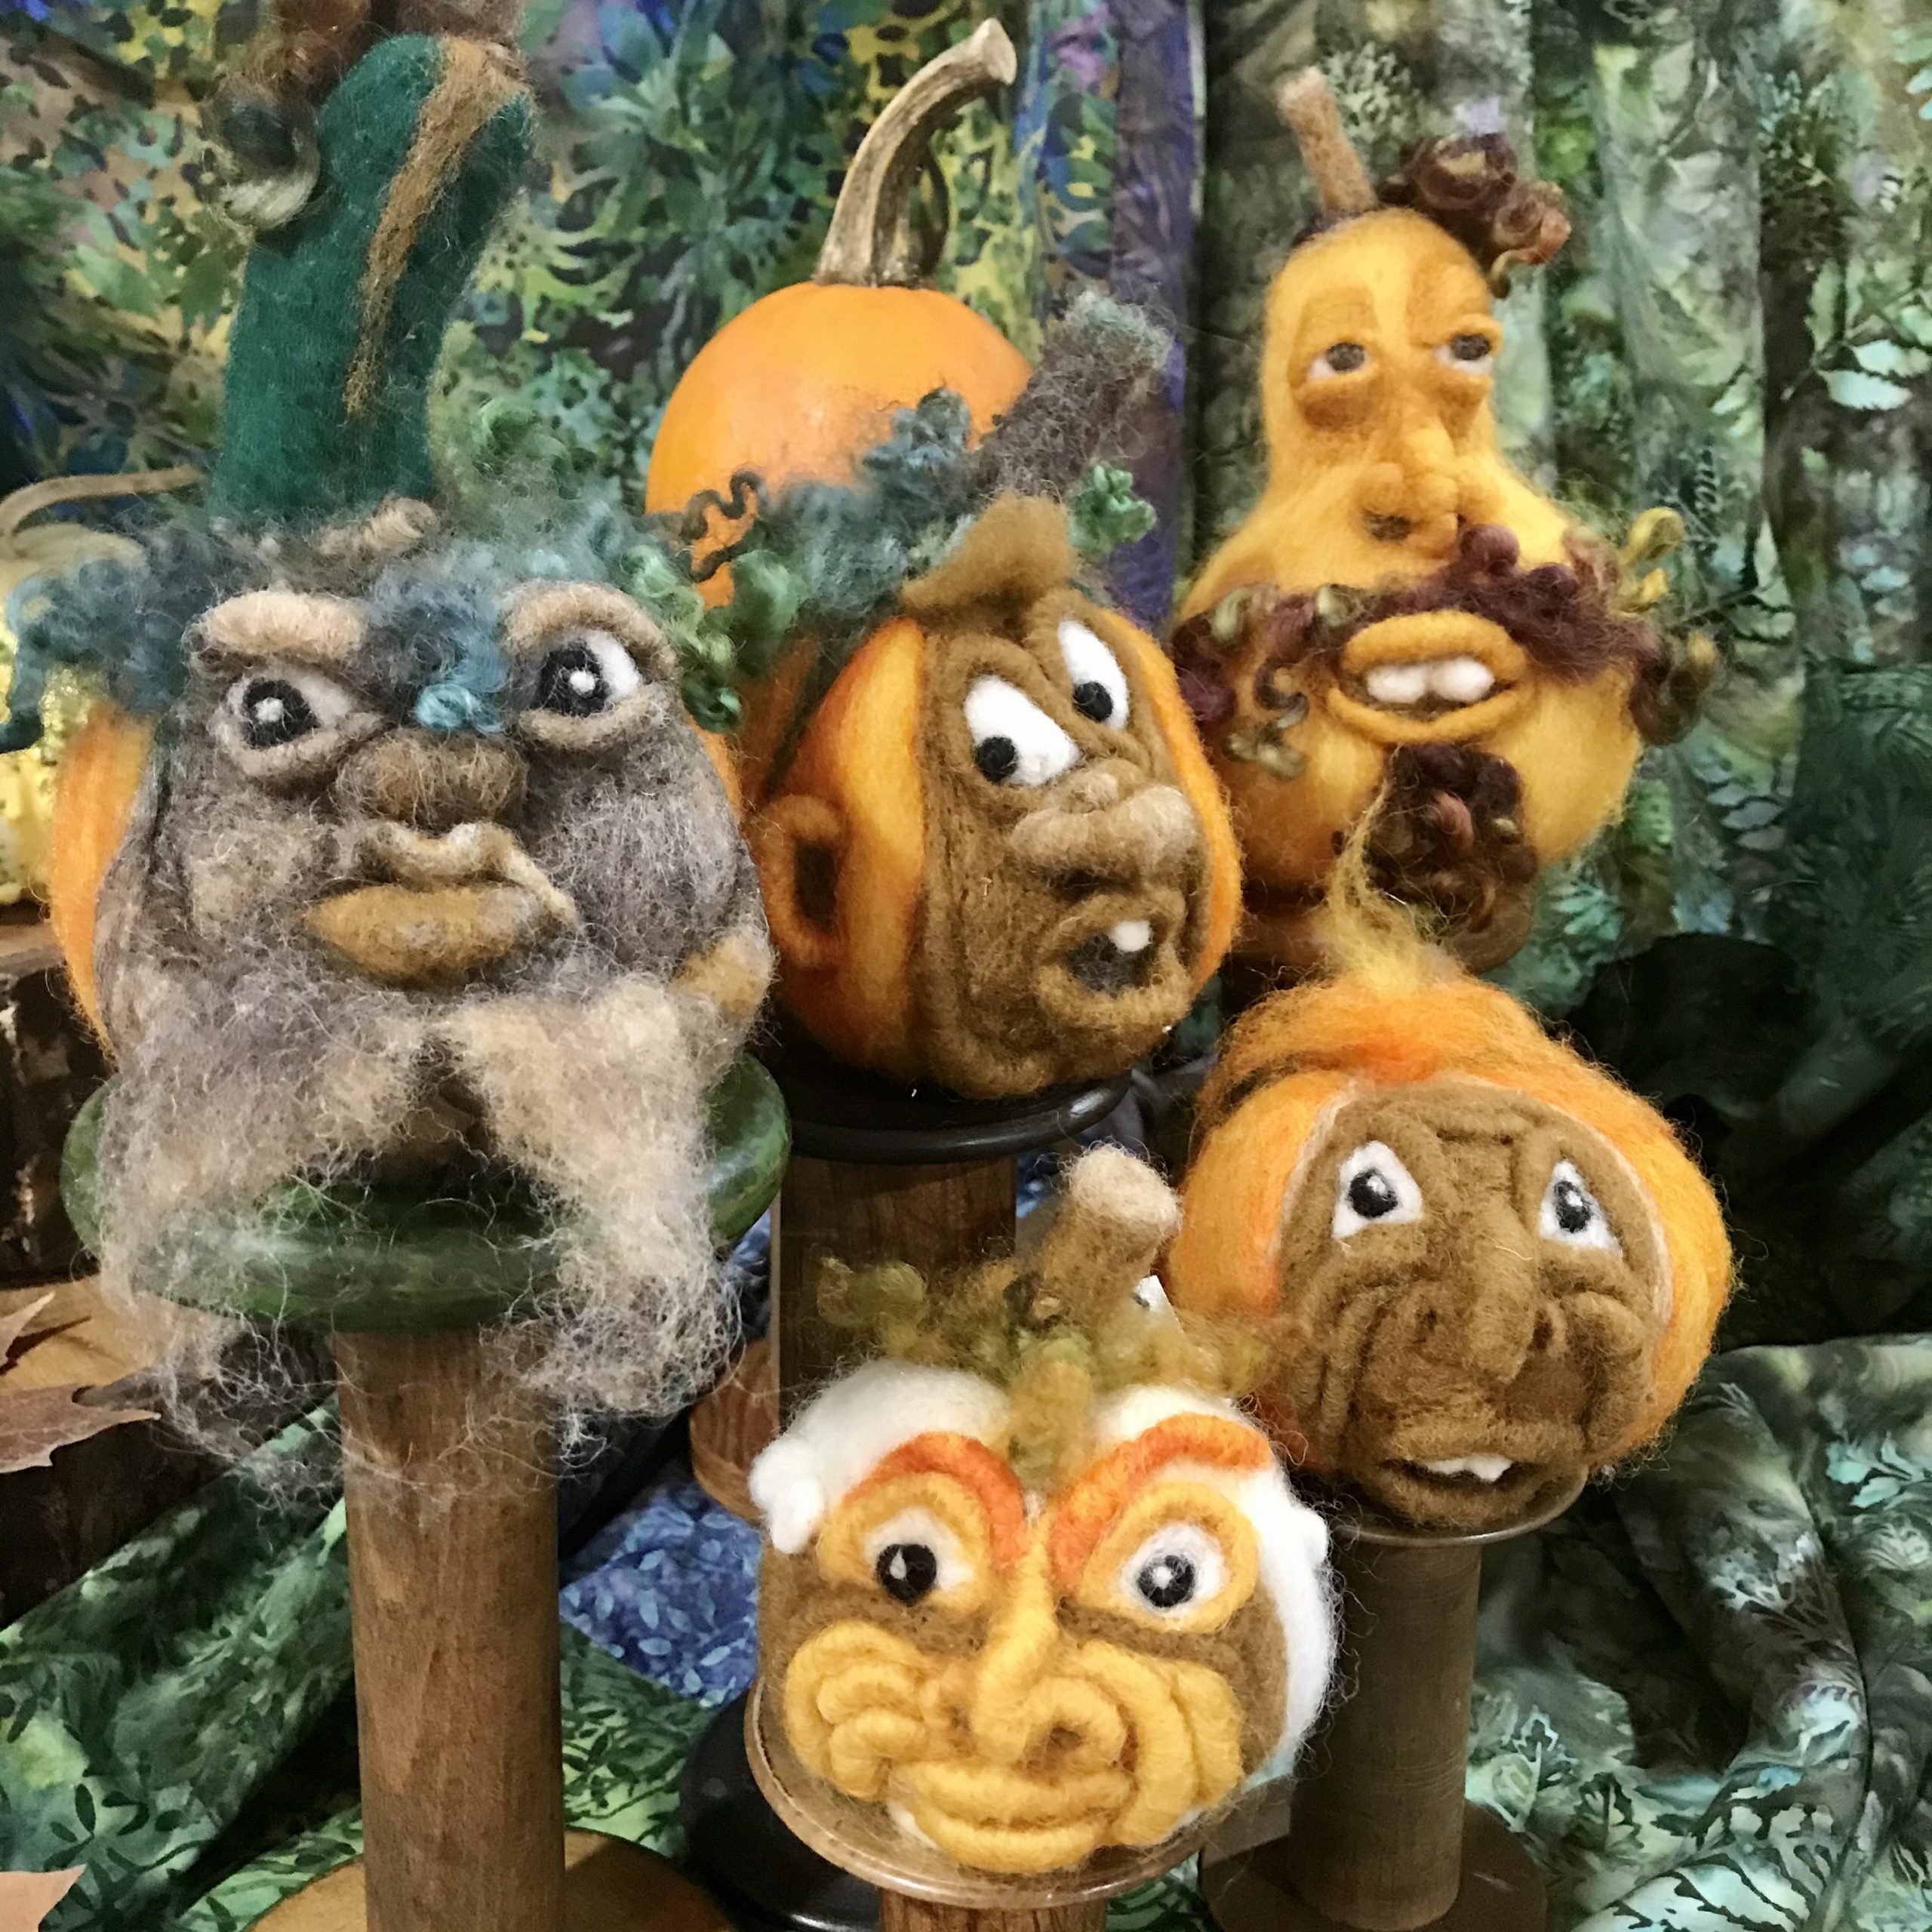 A grouping of 5 needle felted fall gourds with faces in various expressions.